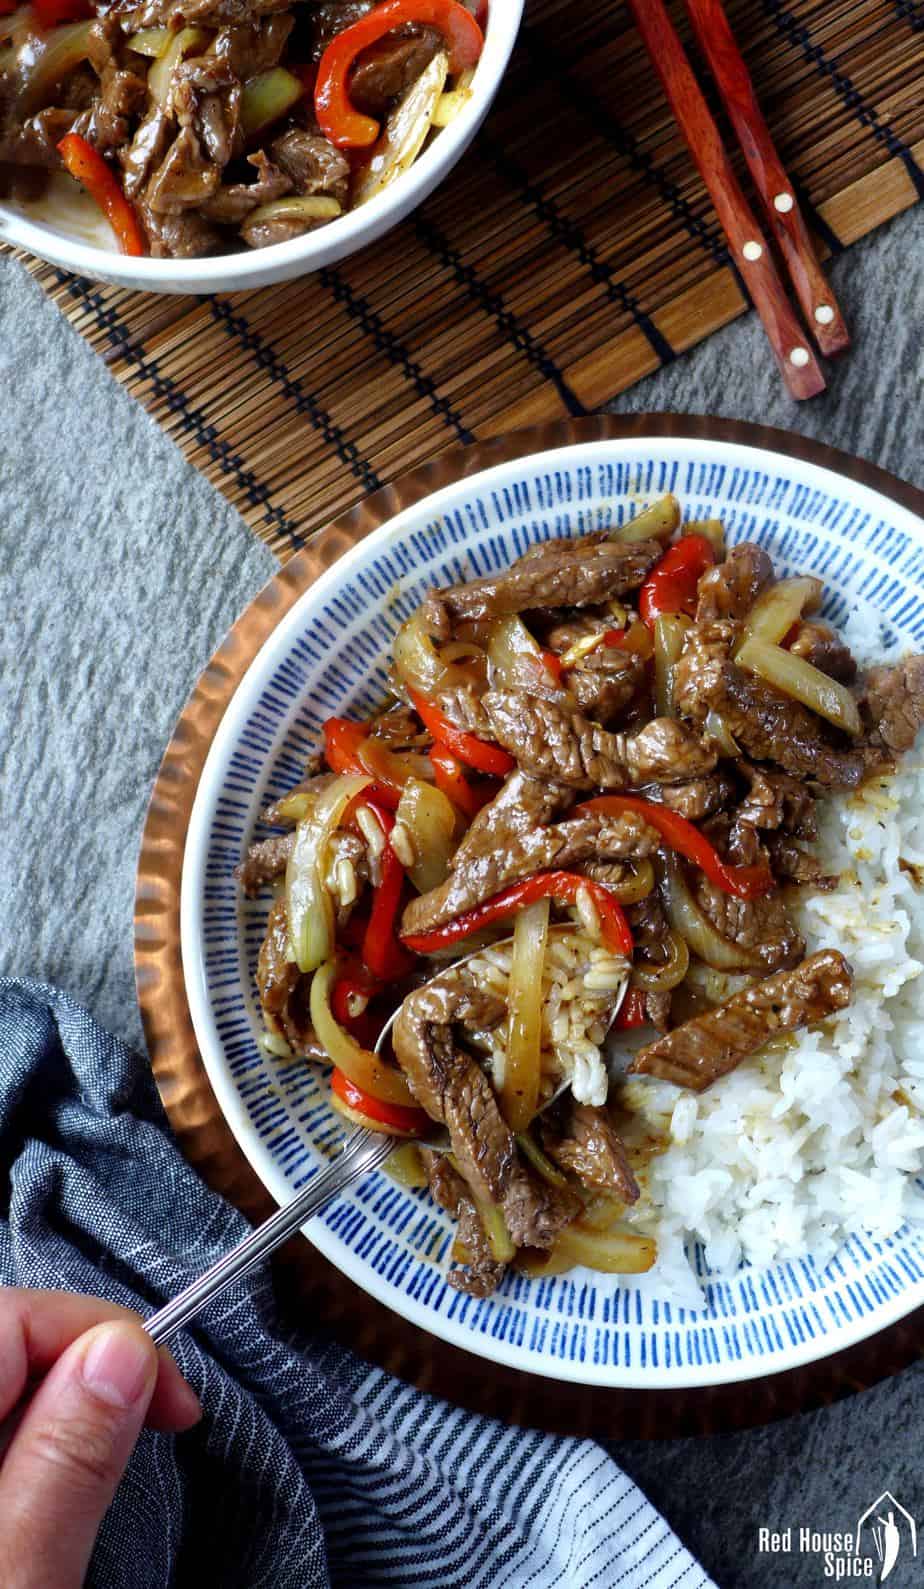 Black Pepper Beef with Vegetables